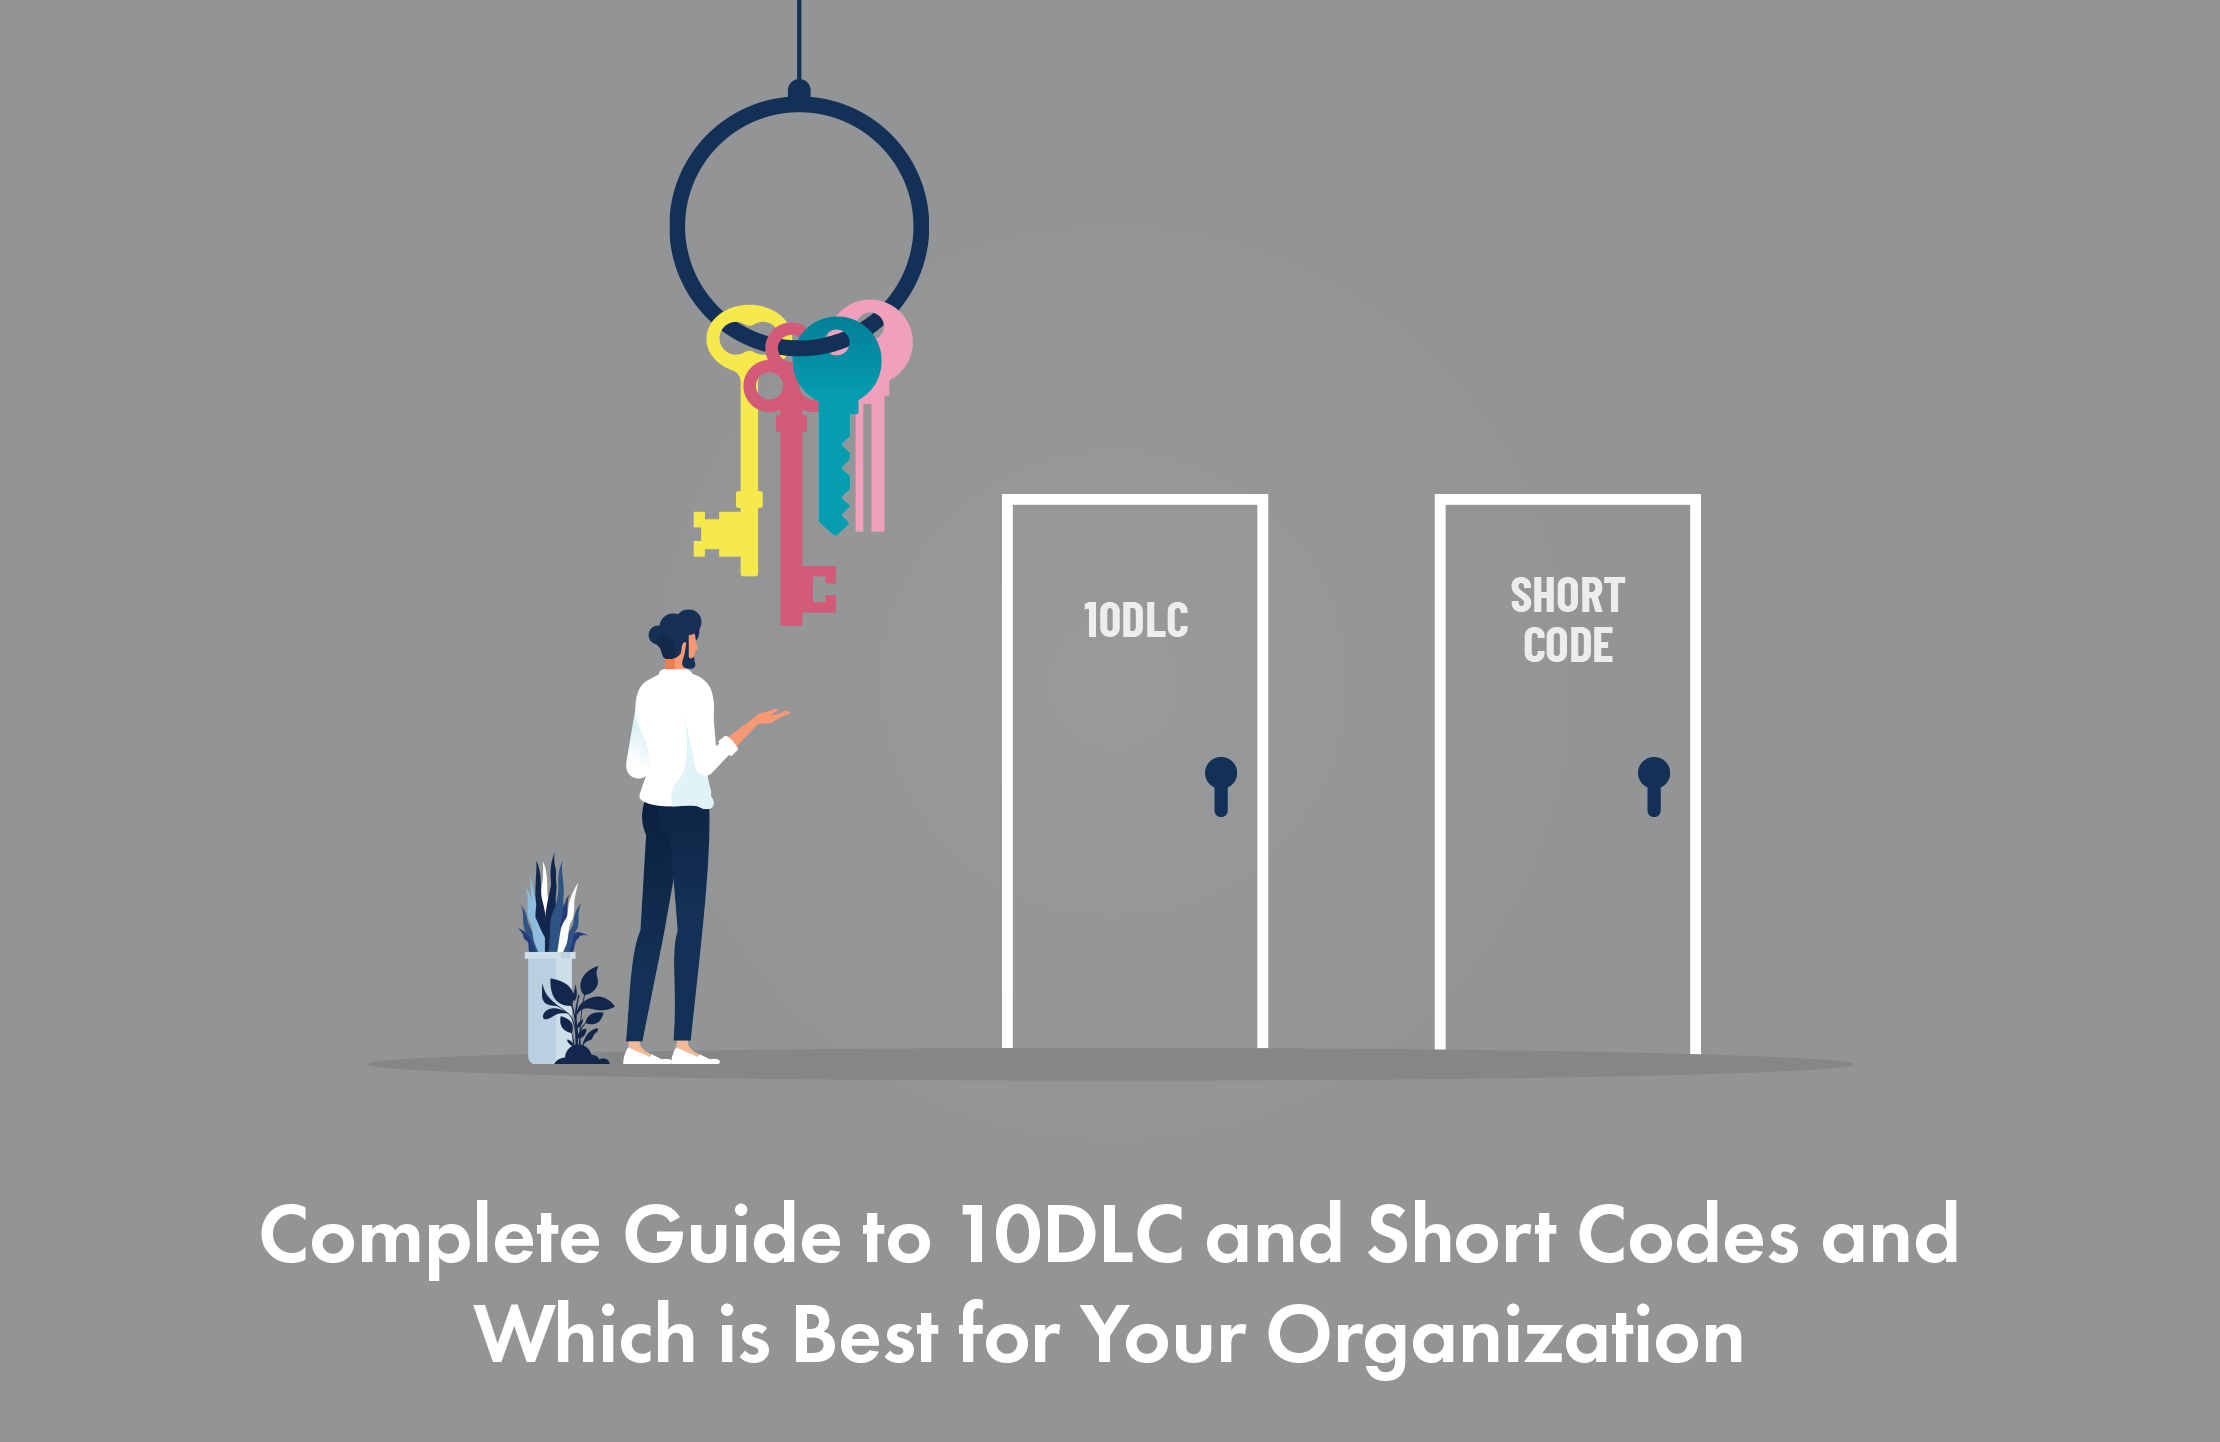 Complete Guide to 10DLC and Short Codes and Which is Best for Your Organization